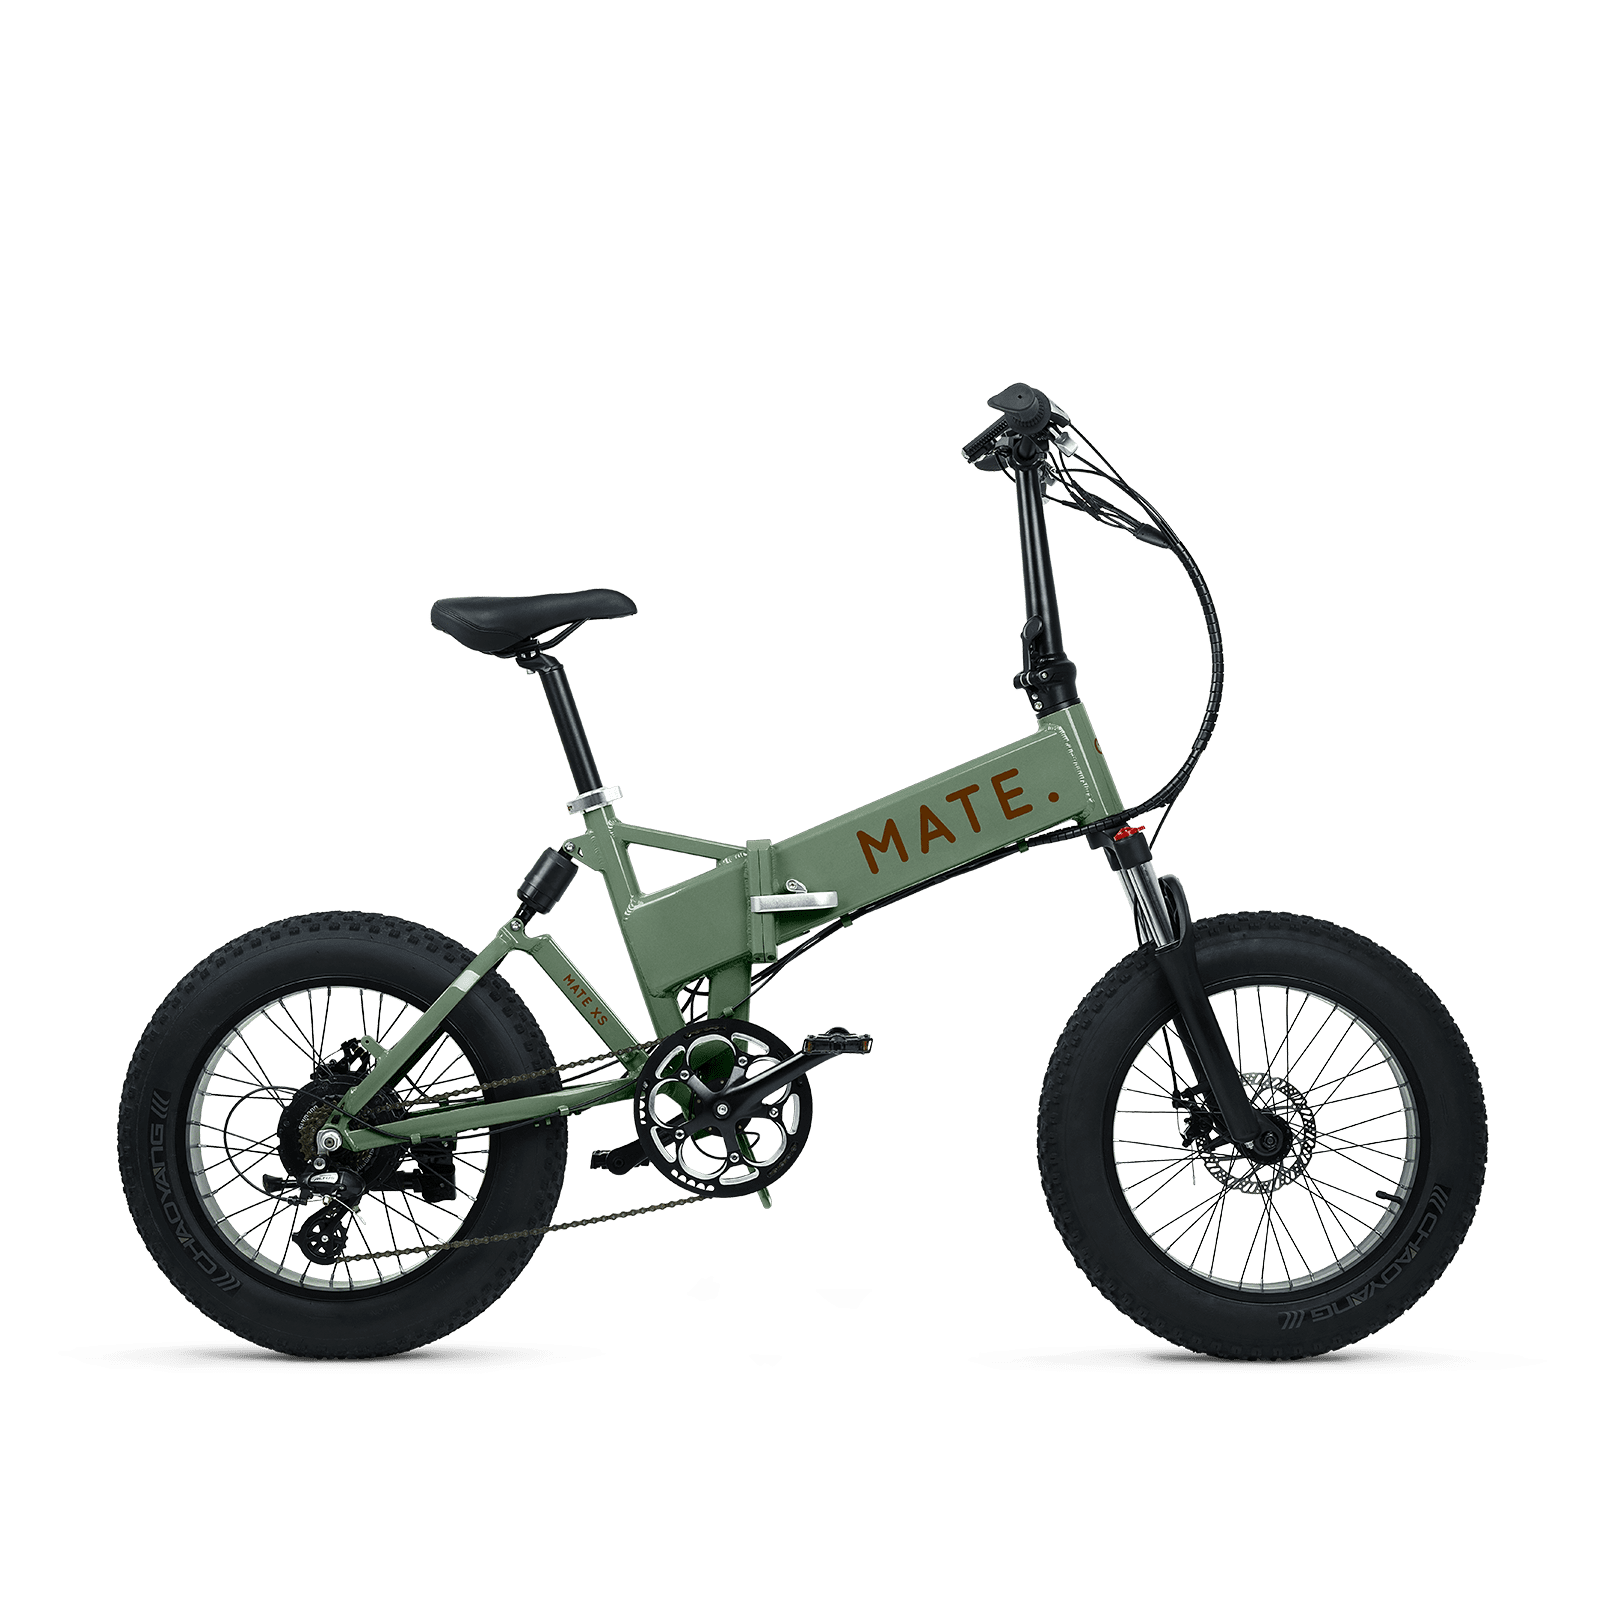 Mate X 750W foldable electric bikes Dusty Army